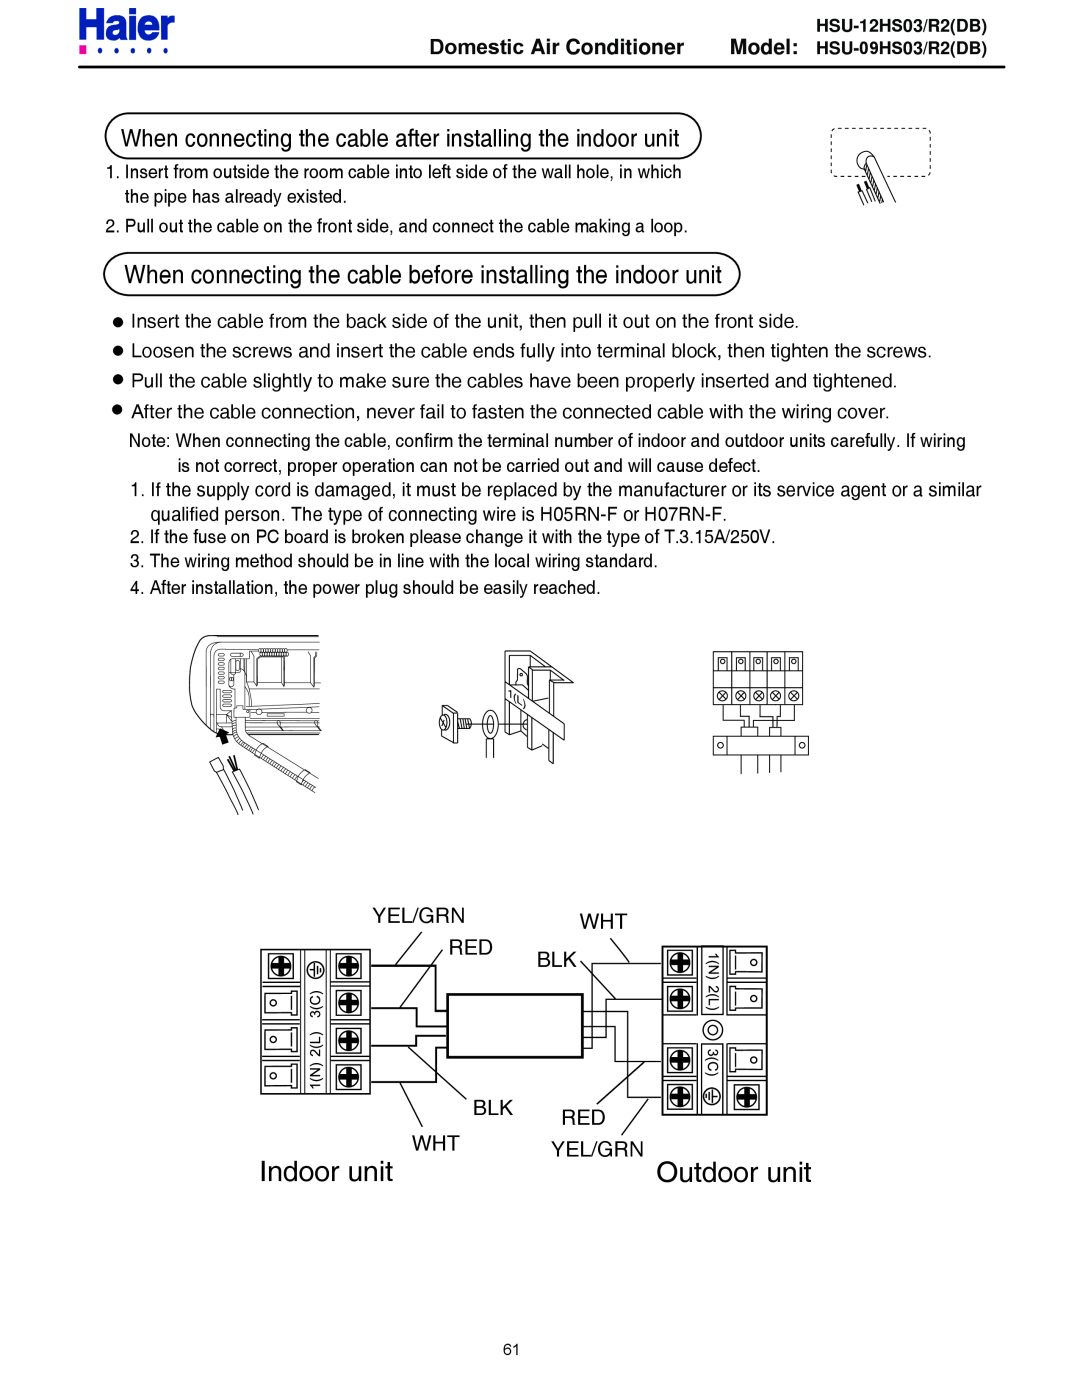 Haier HSU-12HS03/R2DB service manual Indoor unit, Outdoor unit, When connecting the cable after installing the indoor unit 